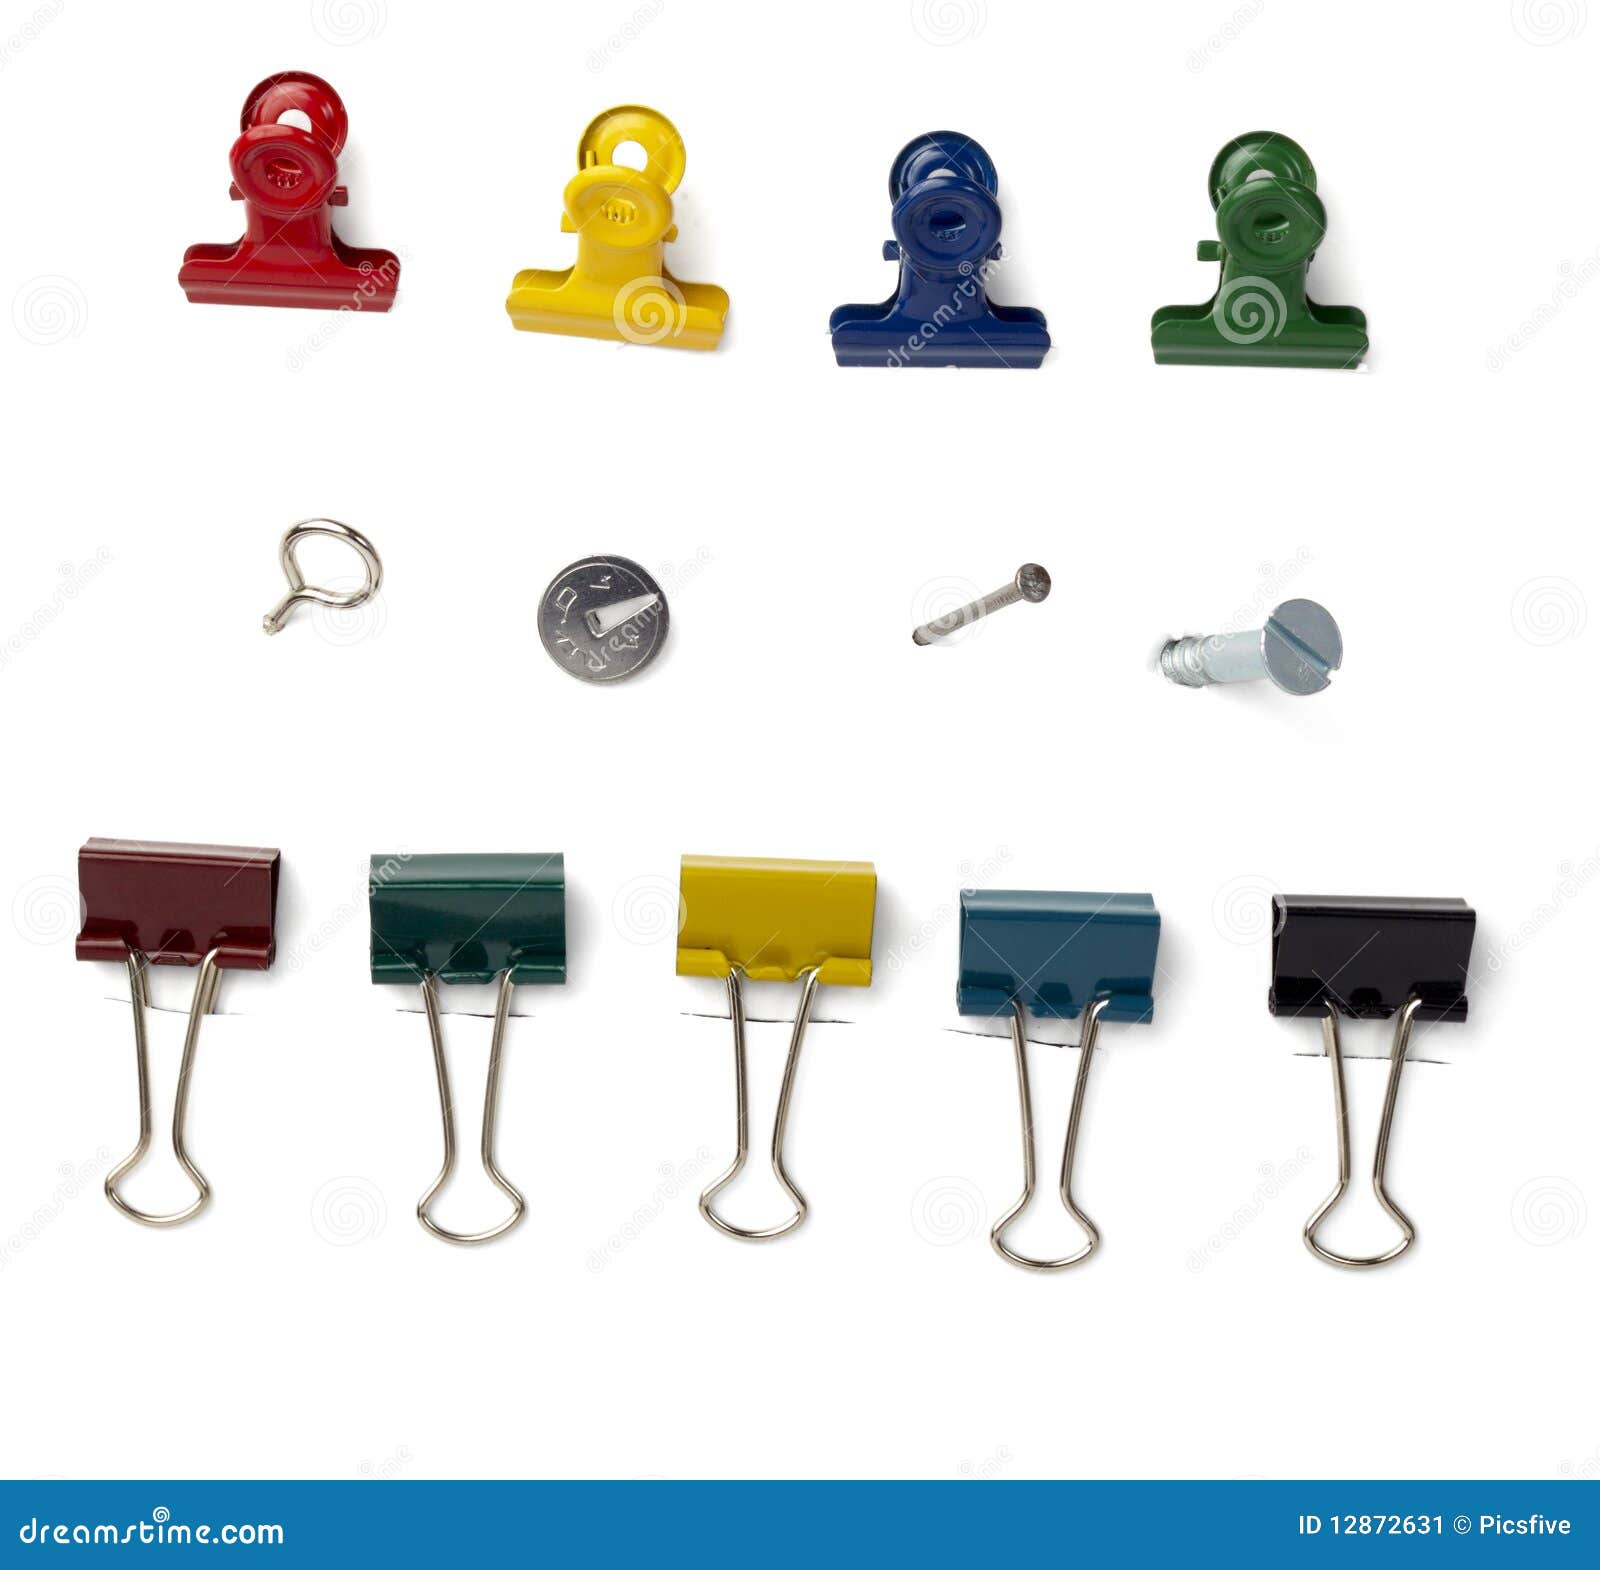 Push pin paper clip stock image. Image of attach, assortment - 12872631